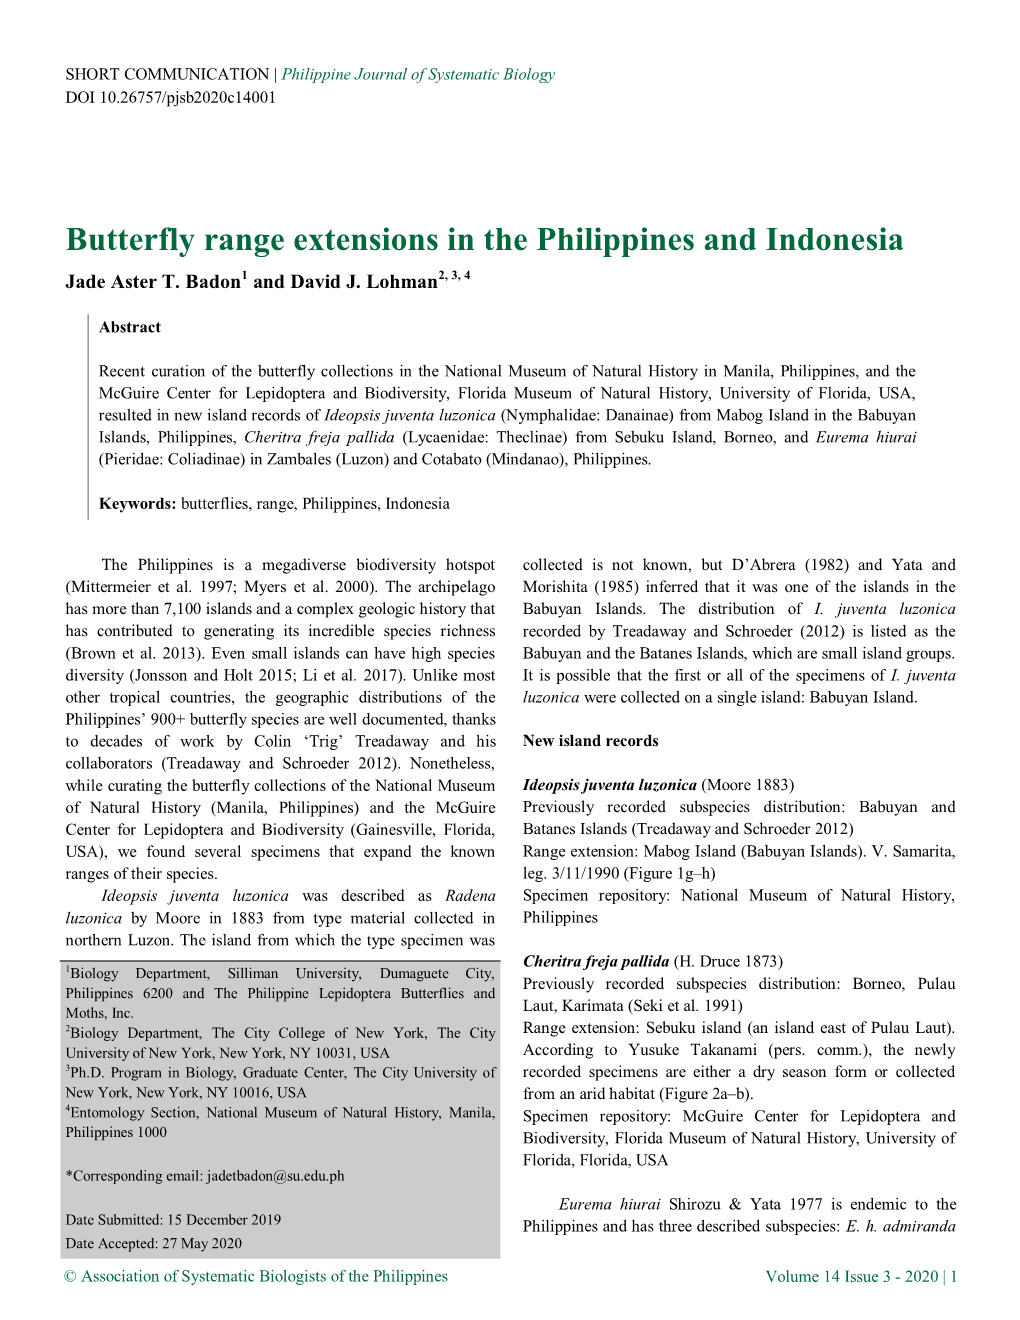 Butterfly Range Extensions in the Philippines and Indonesia Jade Aster T